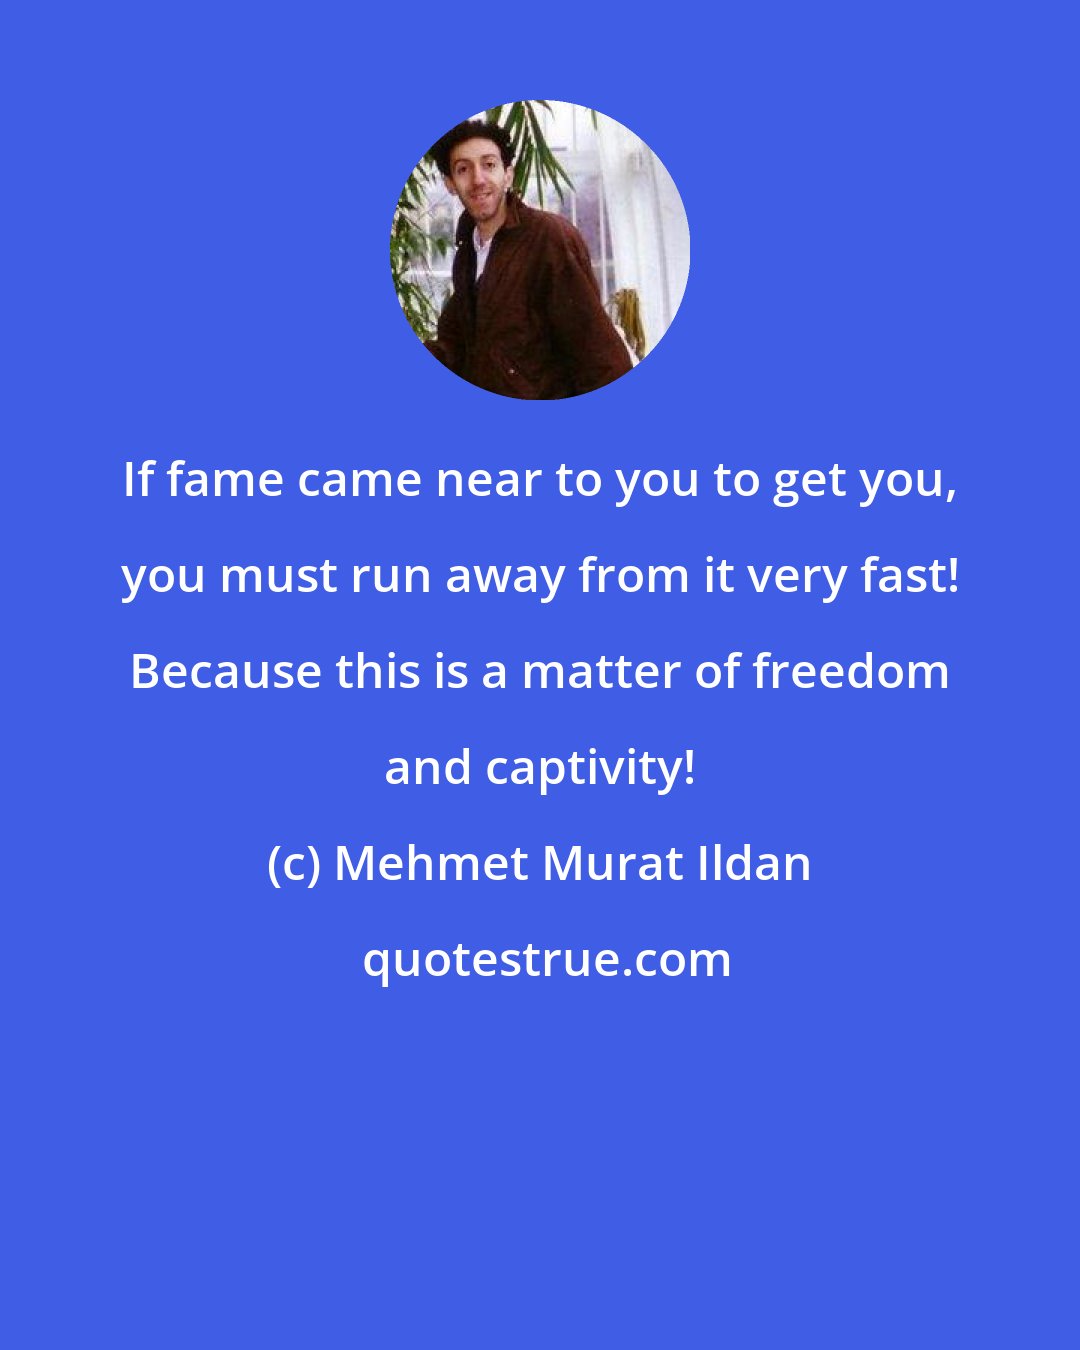 Mehmet Murat Ildan: If fame came near to you to get you, you must run away from it very fast! Because this is a matter of freedom and captivity!